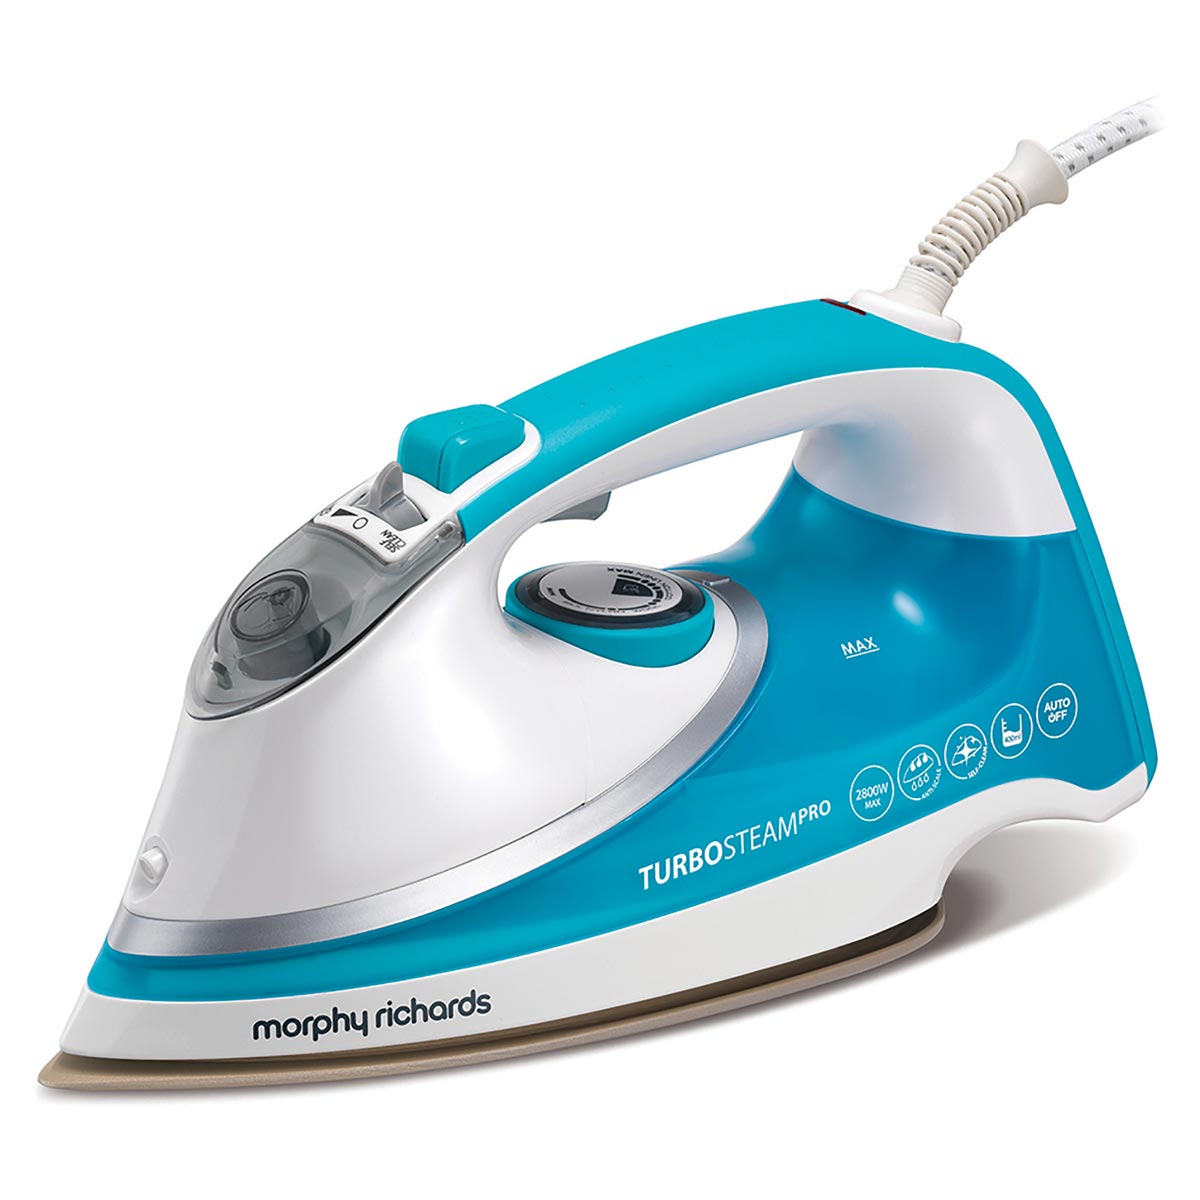 Morphy Richards 303128 Turbosteam Pro Pearl Ceramic 2800W Steam Iron - Blue and White